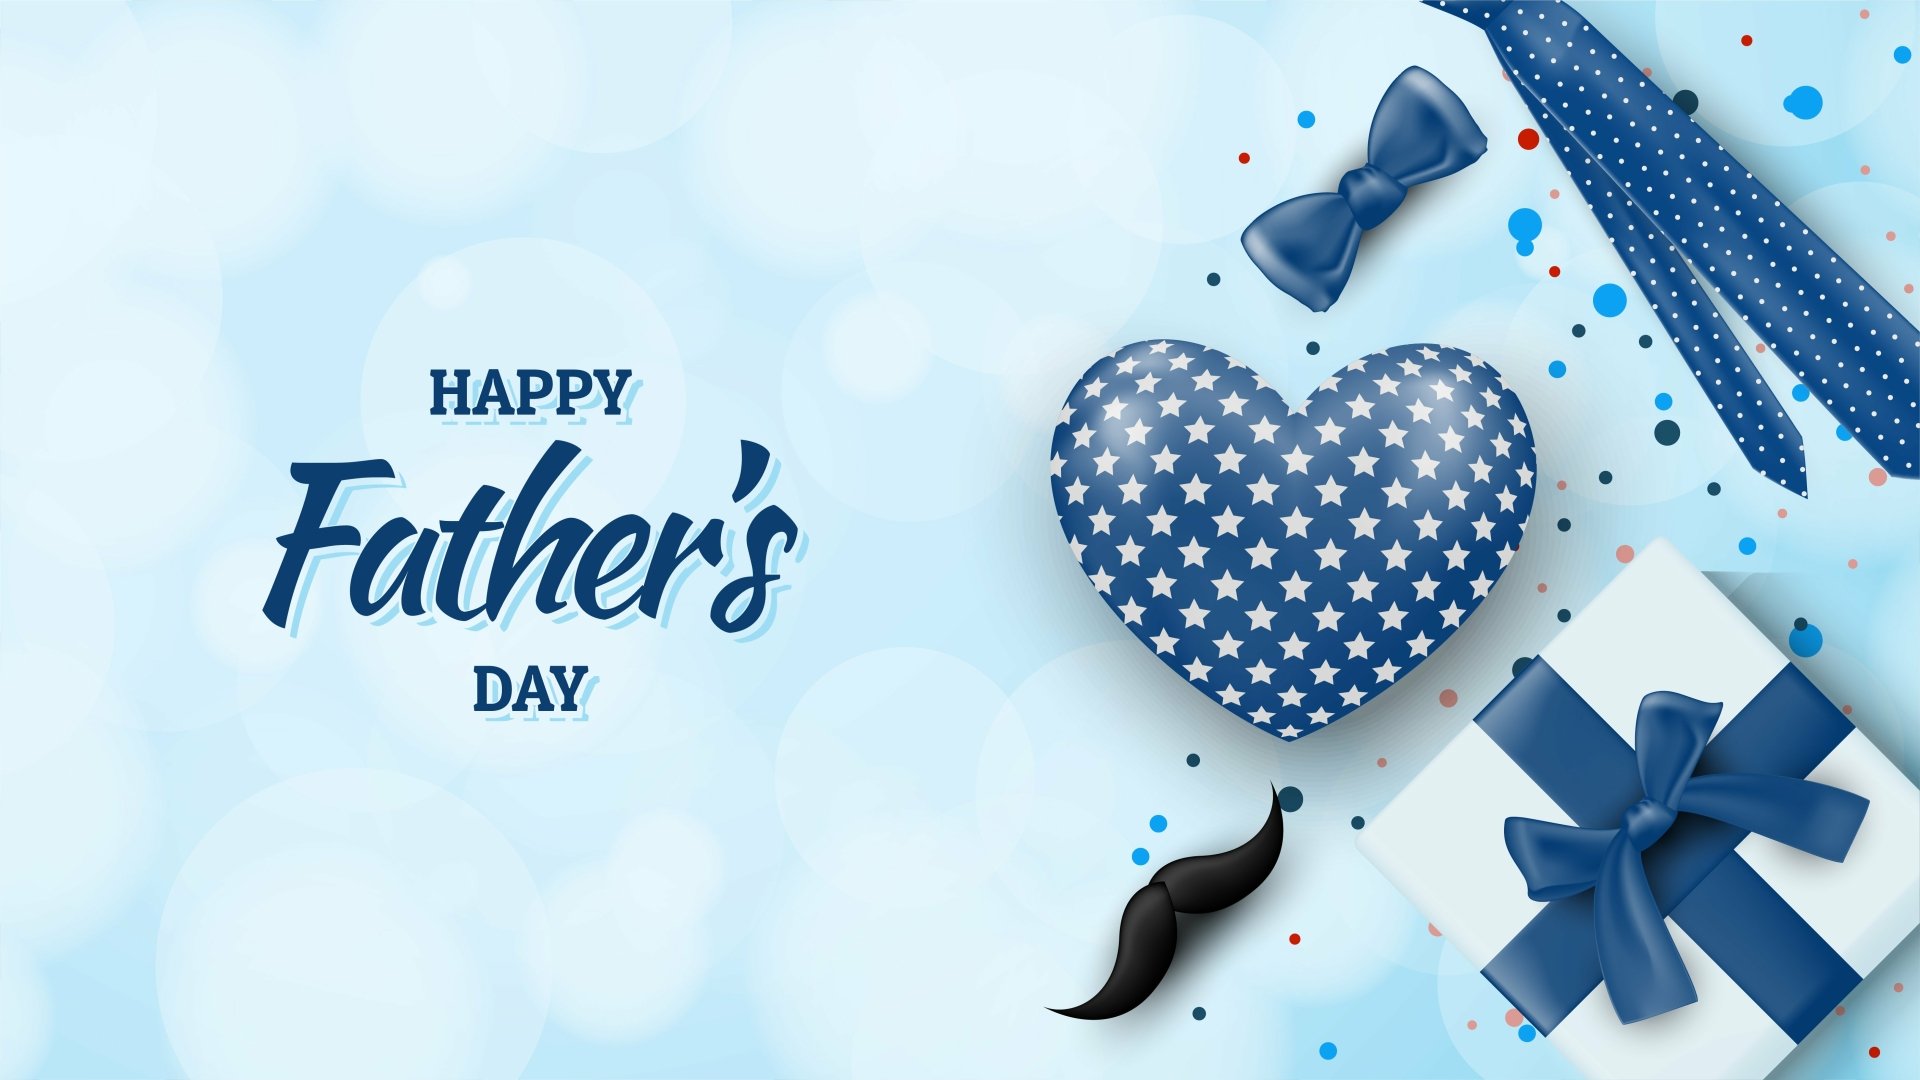 10+ 4K Happy Father's Day Wallpapers Background Images.